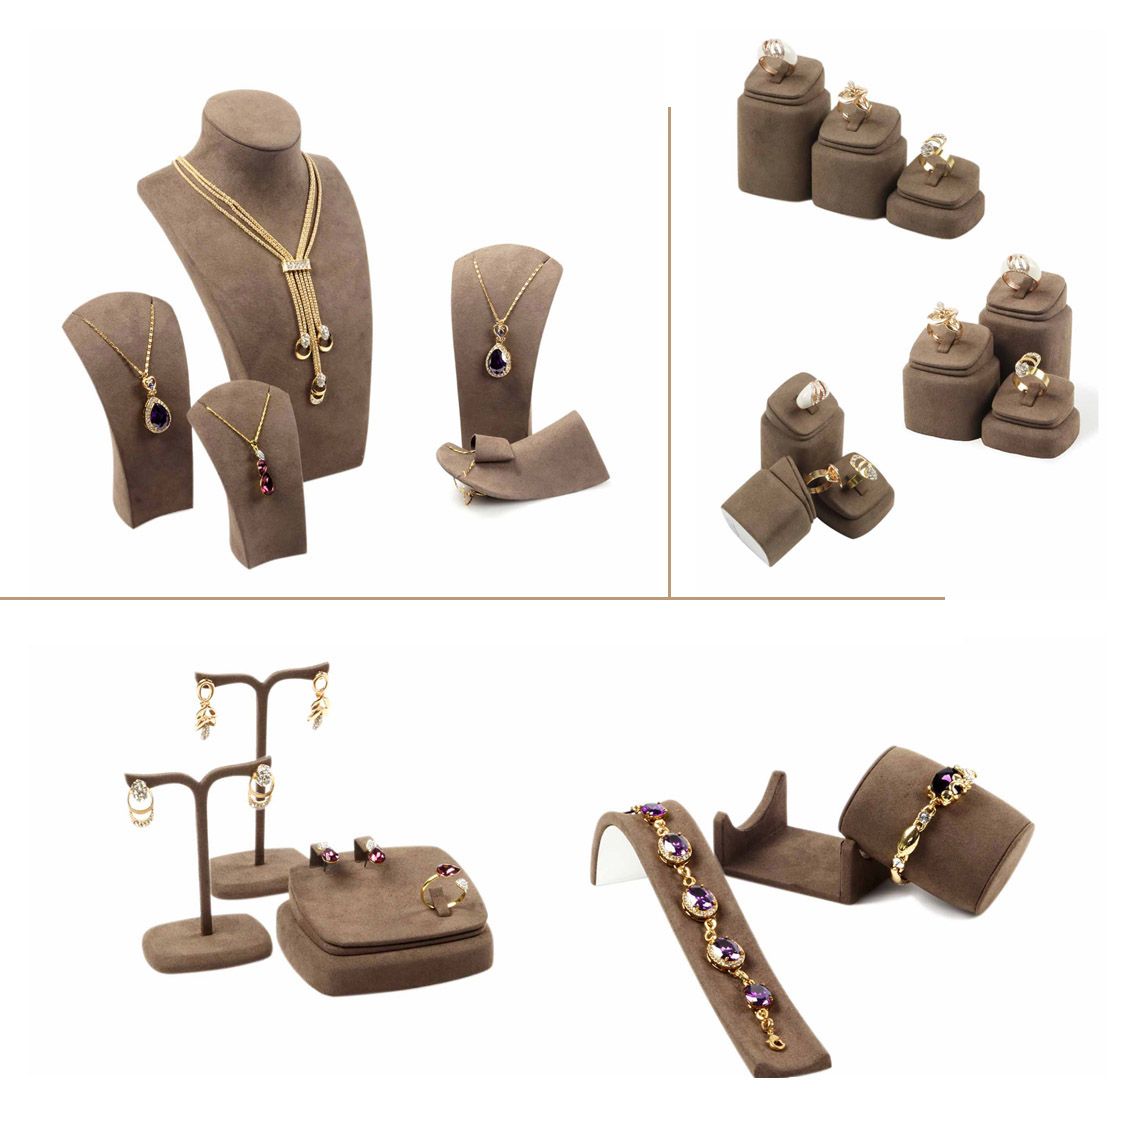 PC17007C Dark Brown Microfiber Engrave Texture Jewelry Display Set For Ring, Necklace, Earring, Bangle